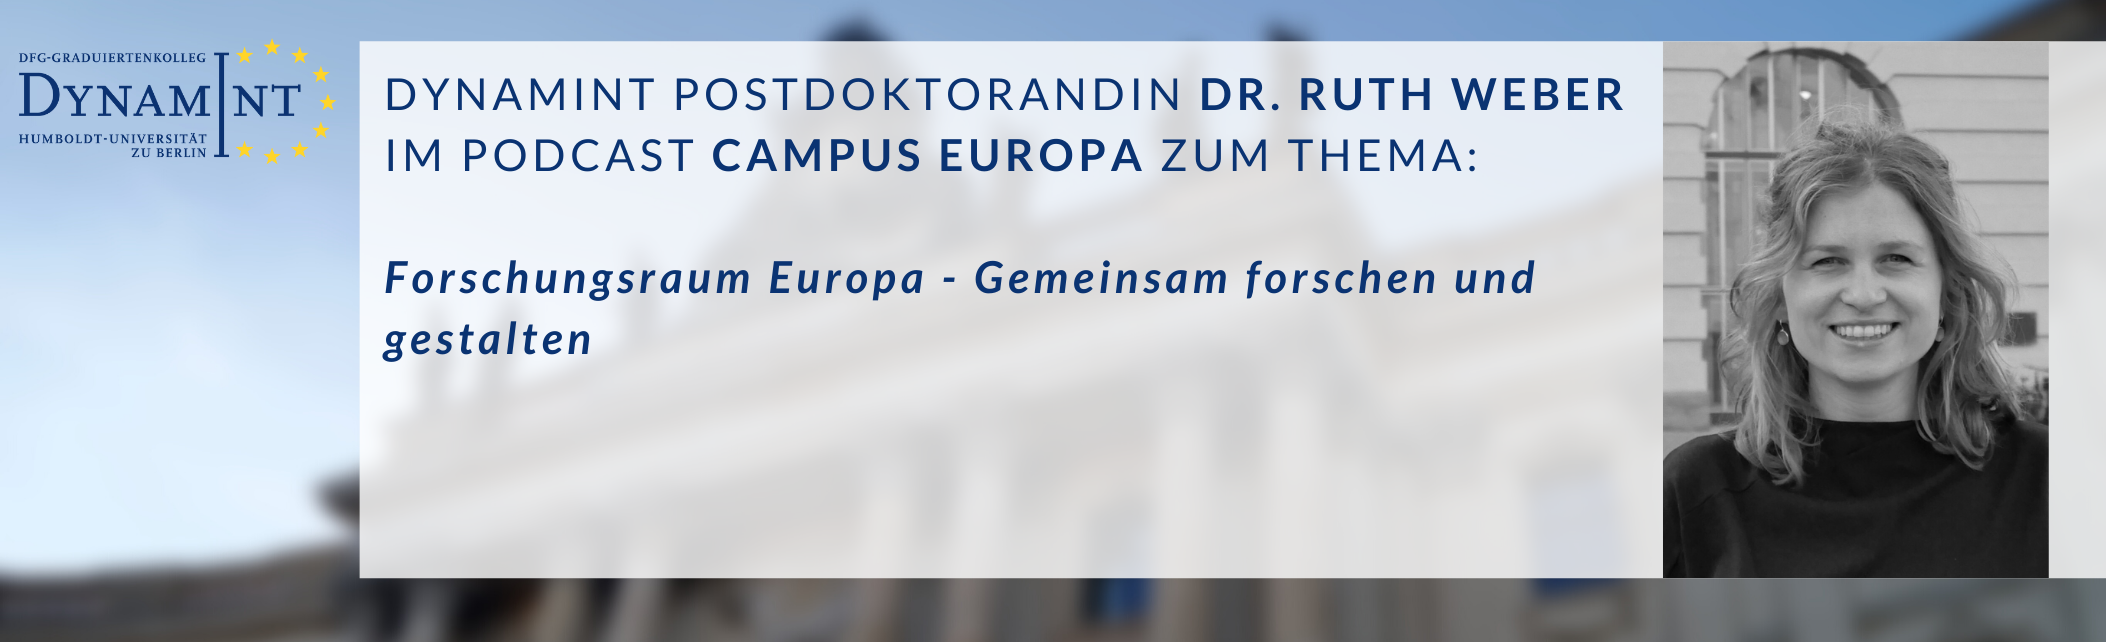 Ruth_Podcast_CampusEuropa